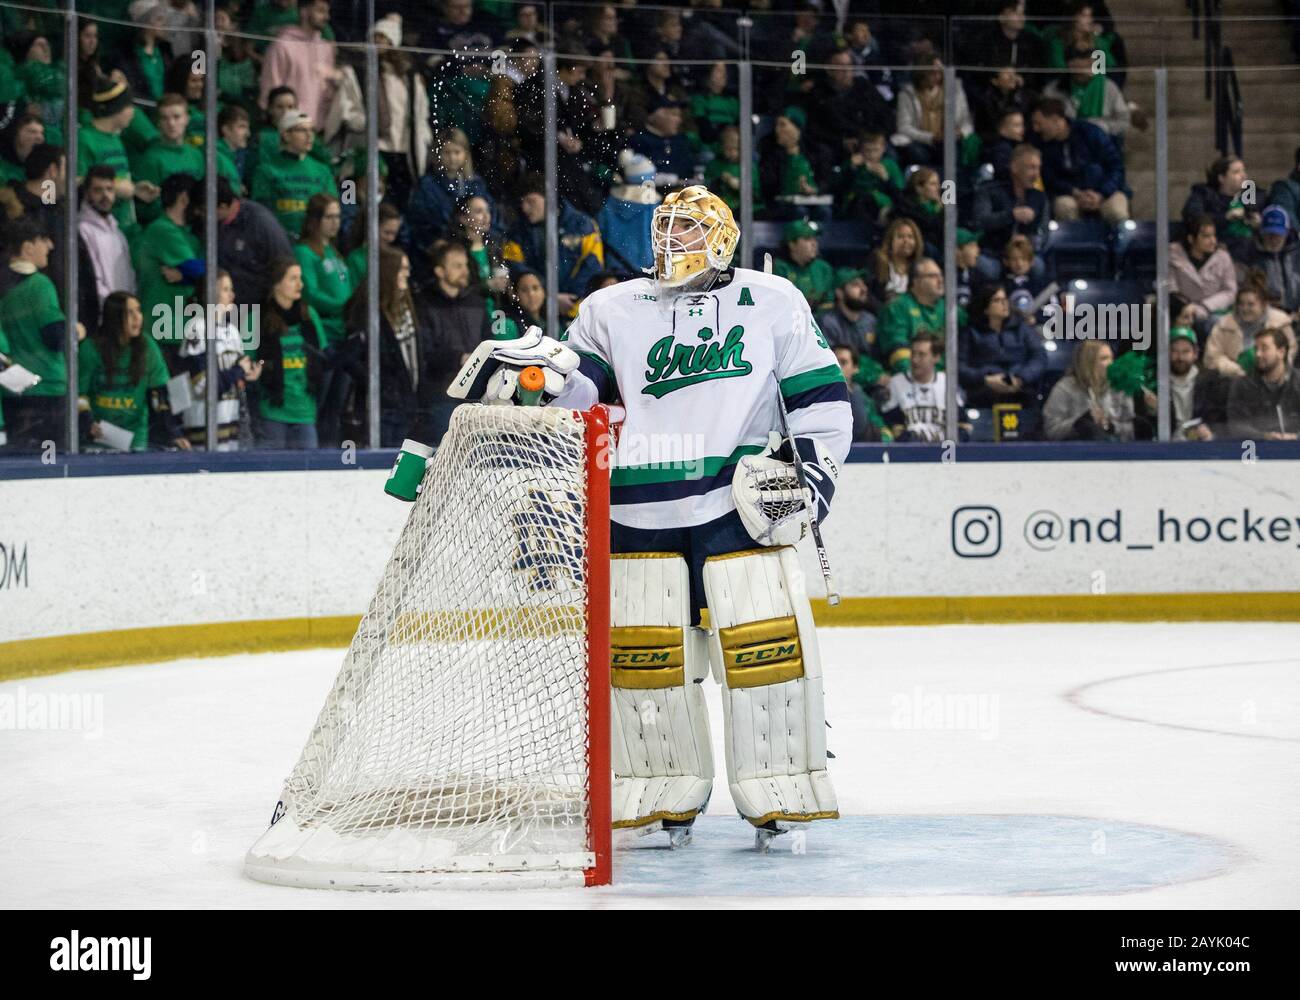 South Bend, Indiana, USA. 15th Feb, 2020. Notre Dame goaltender Cale Morris (32) squirts his water bottle during NCAA Hockey game action between the Minnesota Golden Gophers and the Notre Dame Fighting Irish at Compton Family Ice Arena in South Bend, Indiana. John Mersits/CSM/Alamy Live News Stock Photo